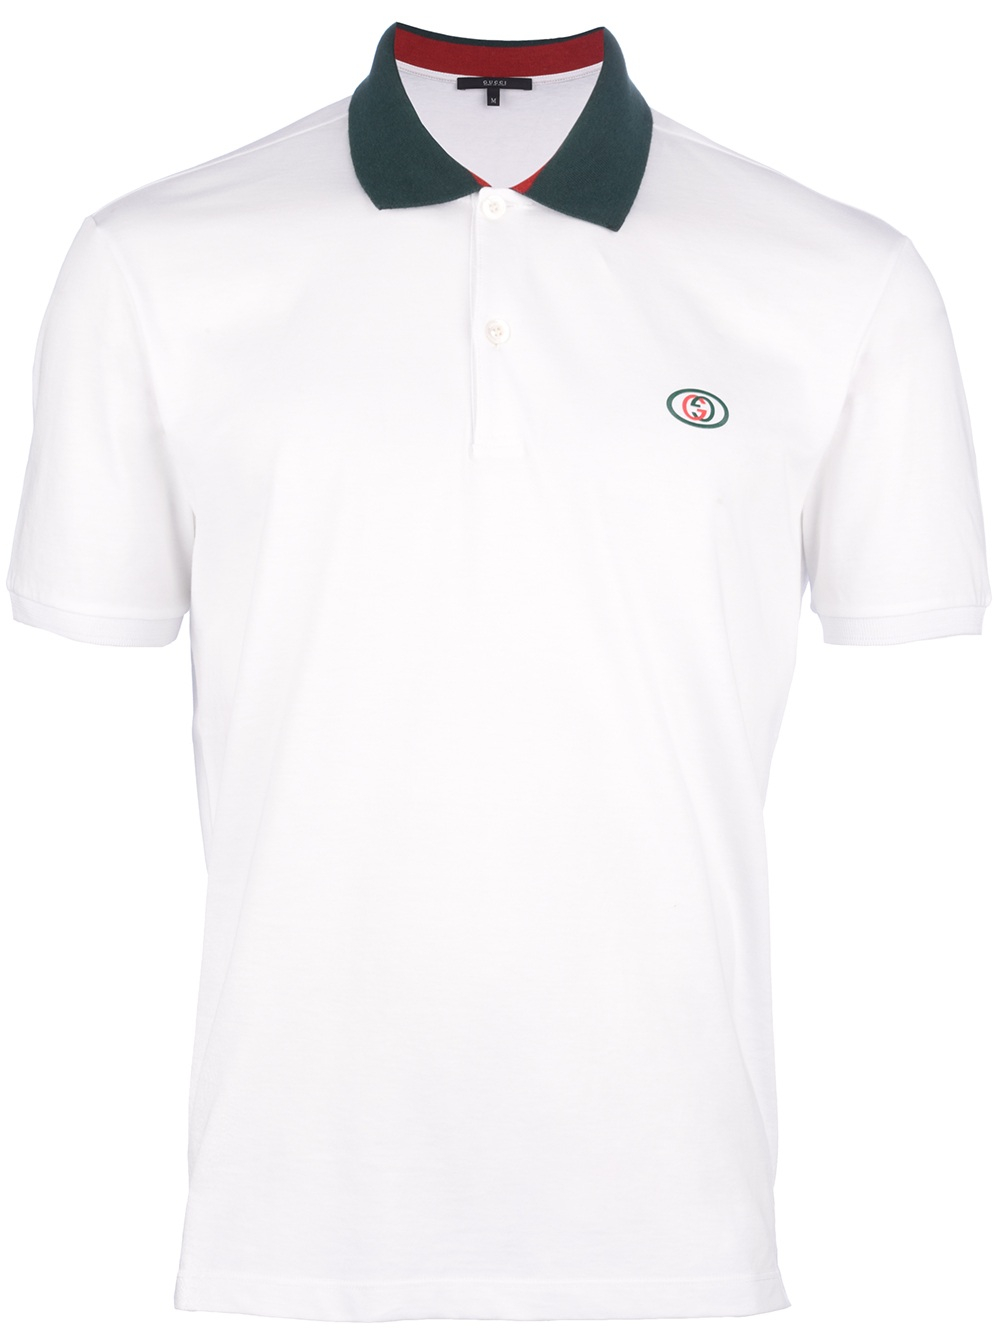 Gucci Short-sleeved Polo Shirt in White for Men - Lyst